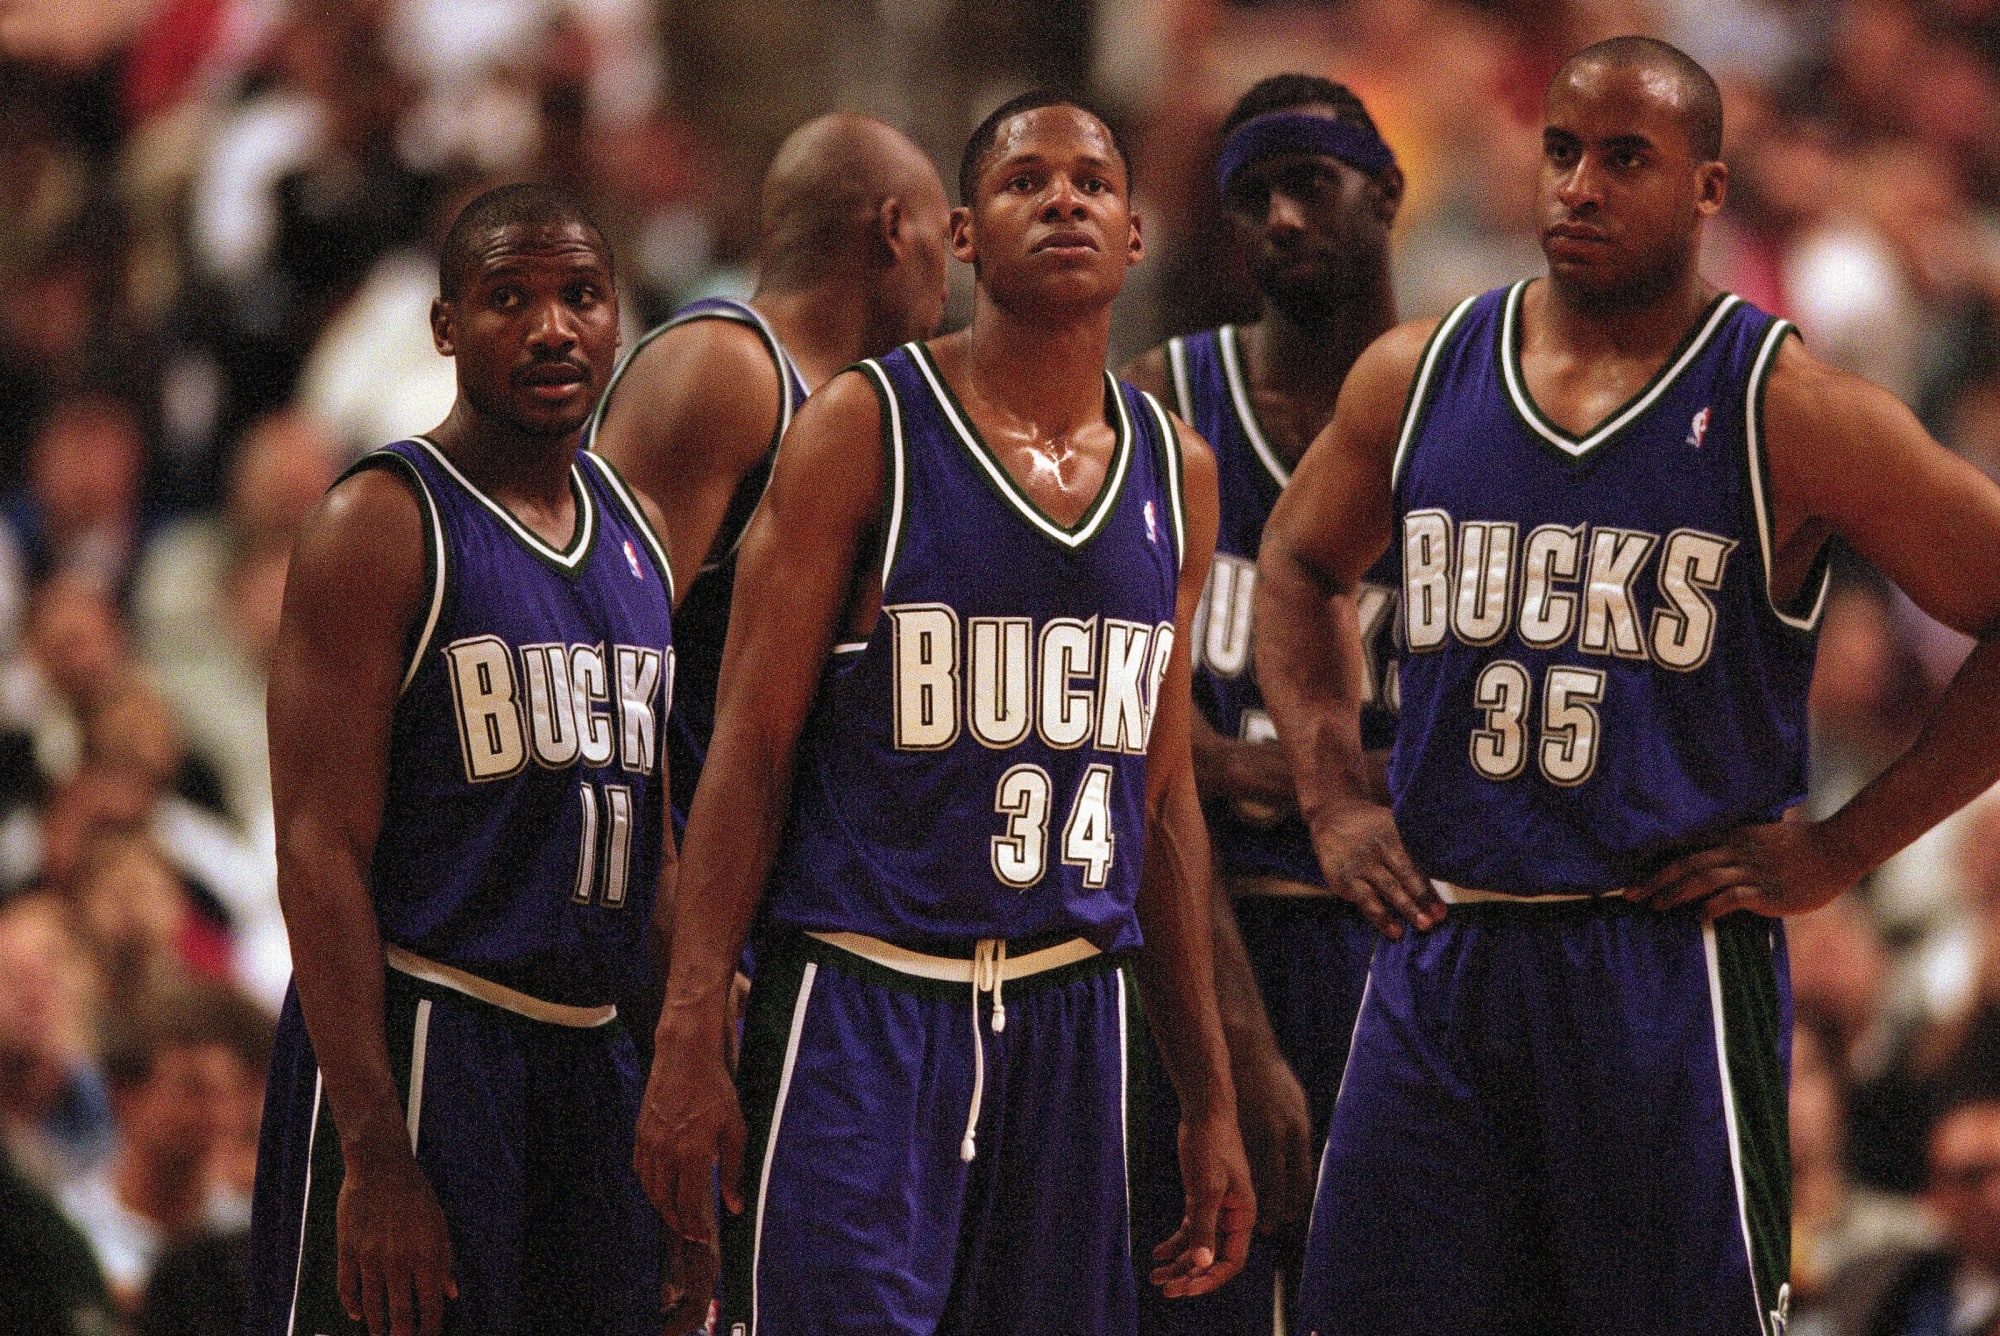 Miwakee Bucks All-Time What If Team